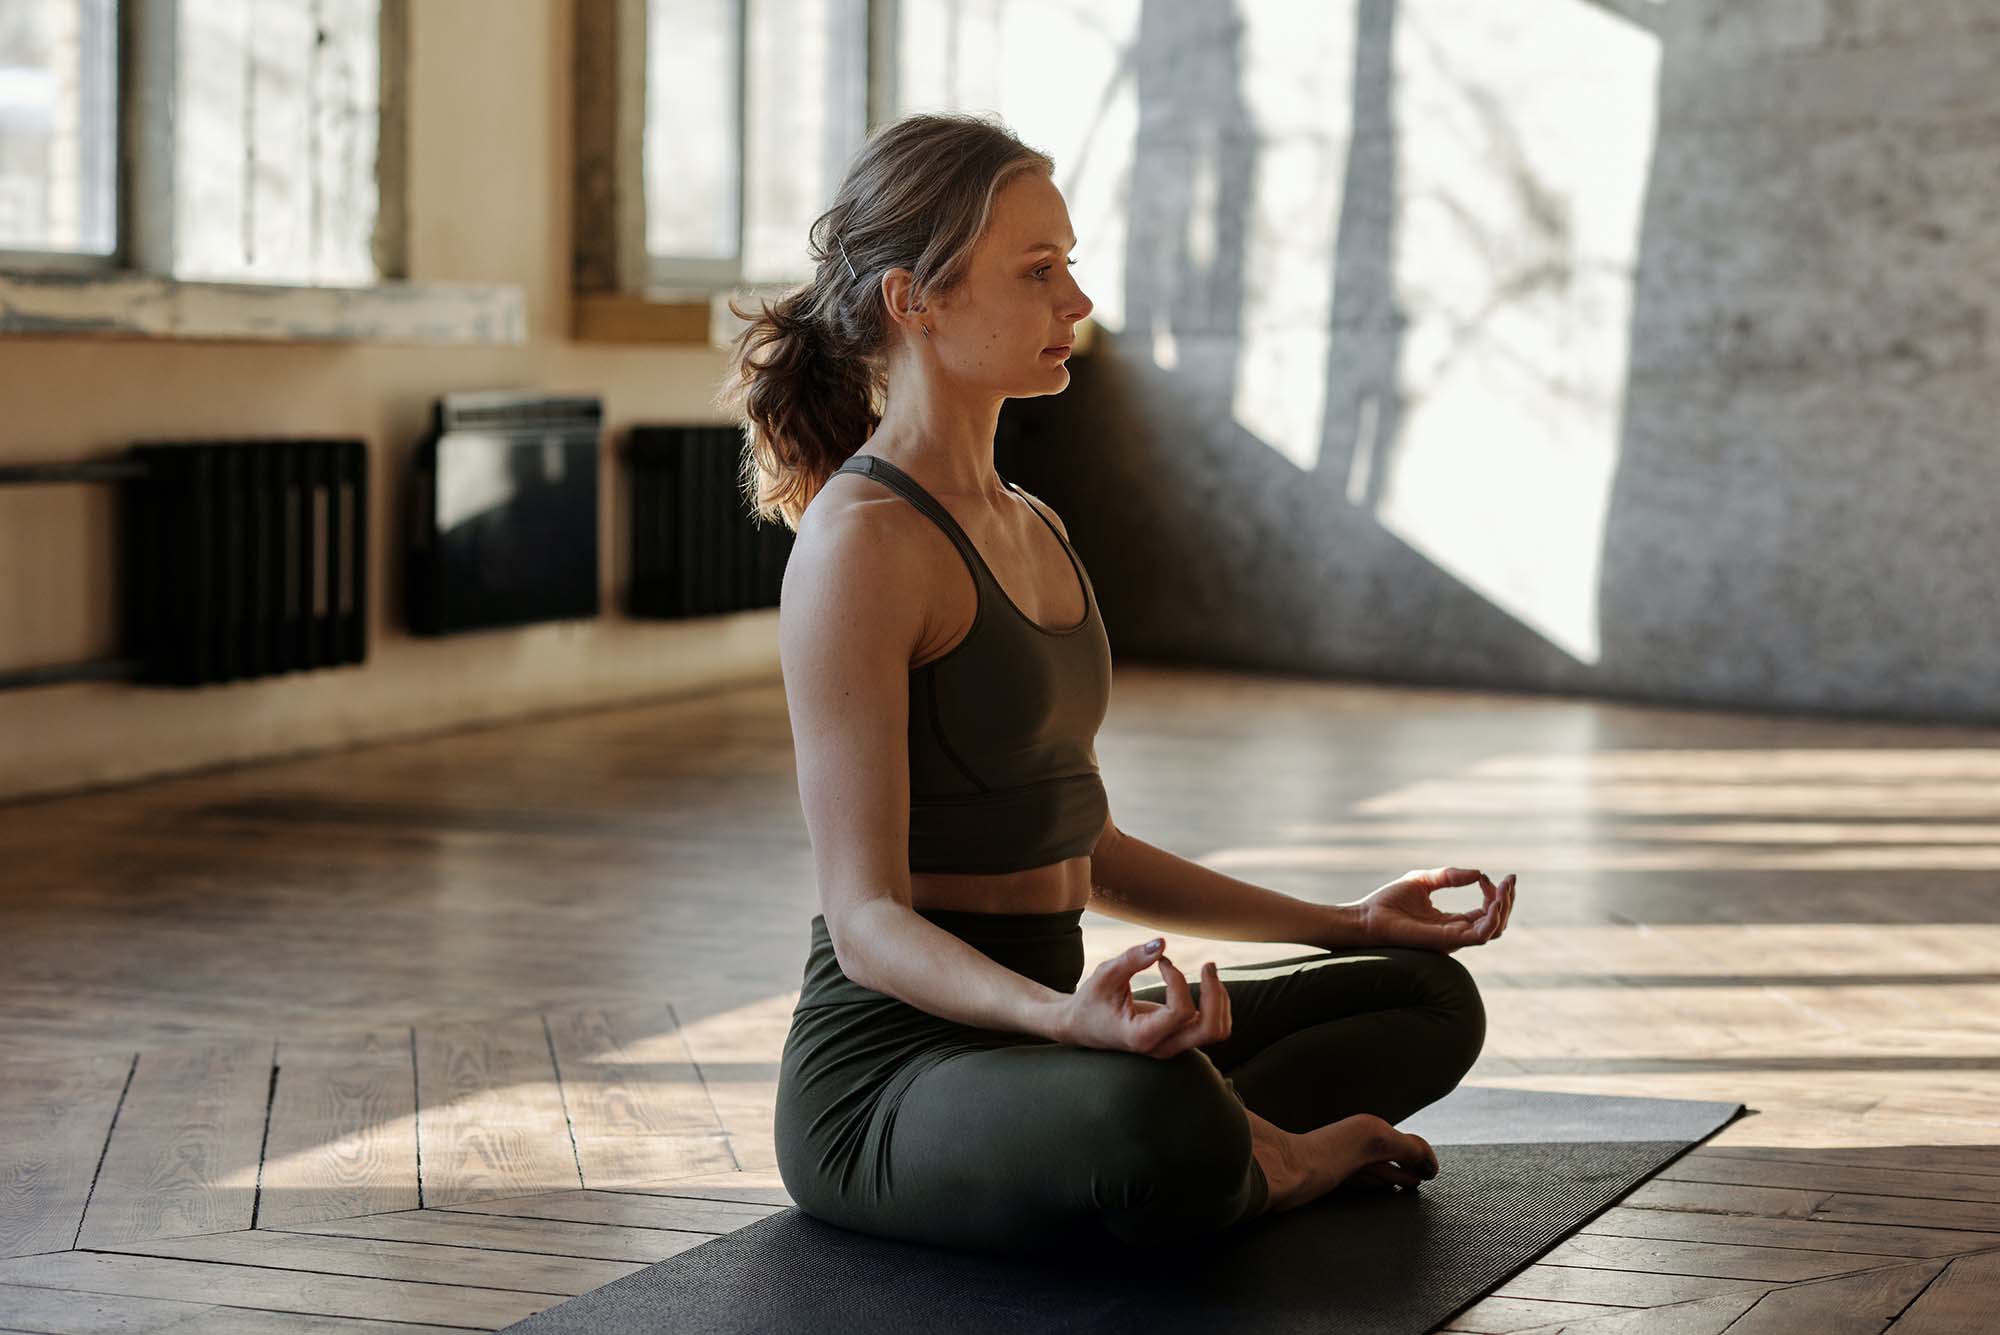 Girl who loves her body and stays positive through meditation